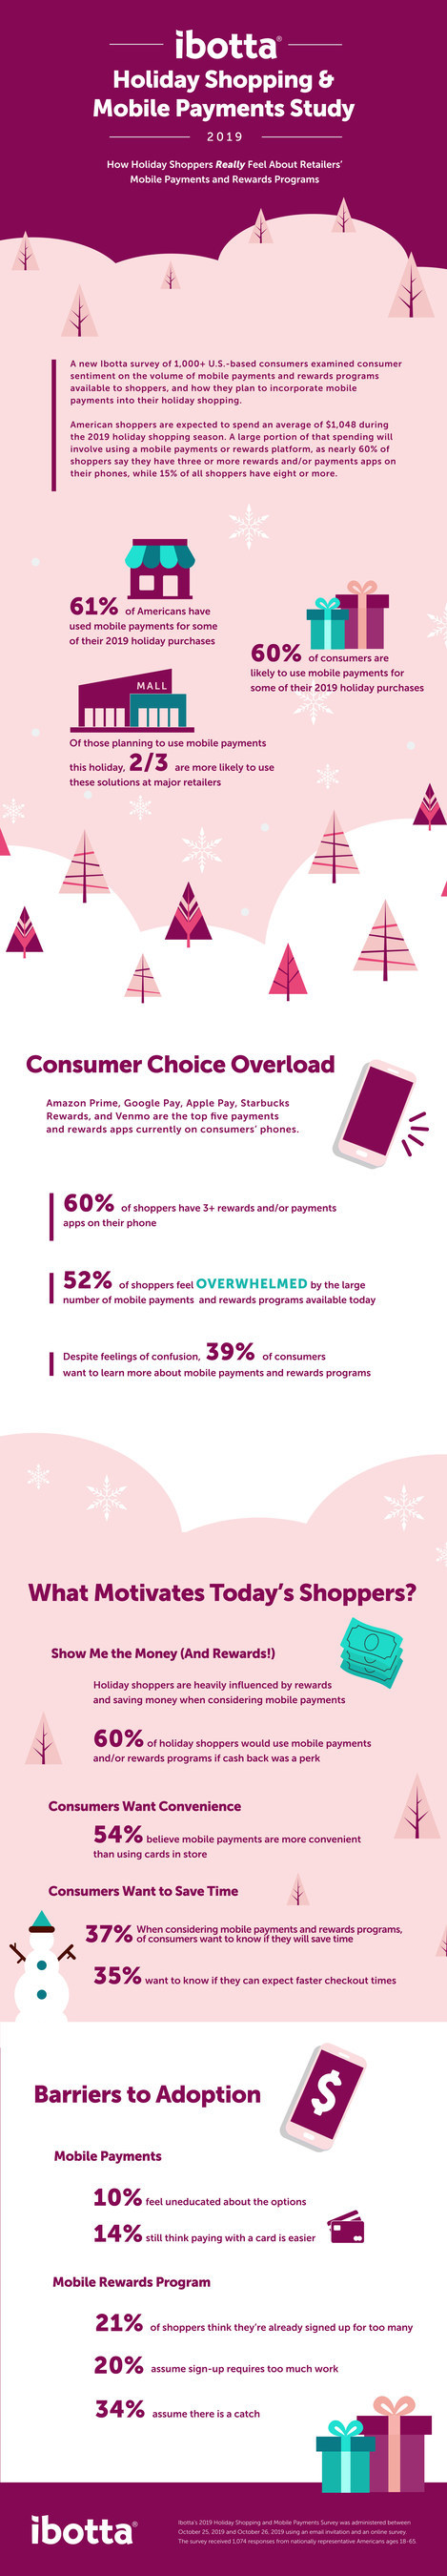 Ibotta Holiday Shopping and Mobile Payments Study